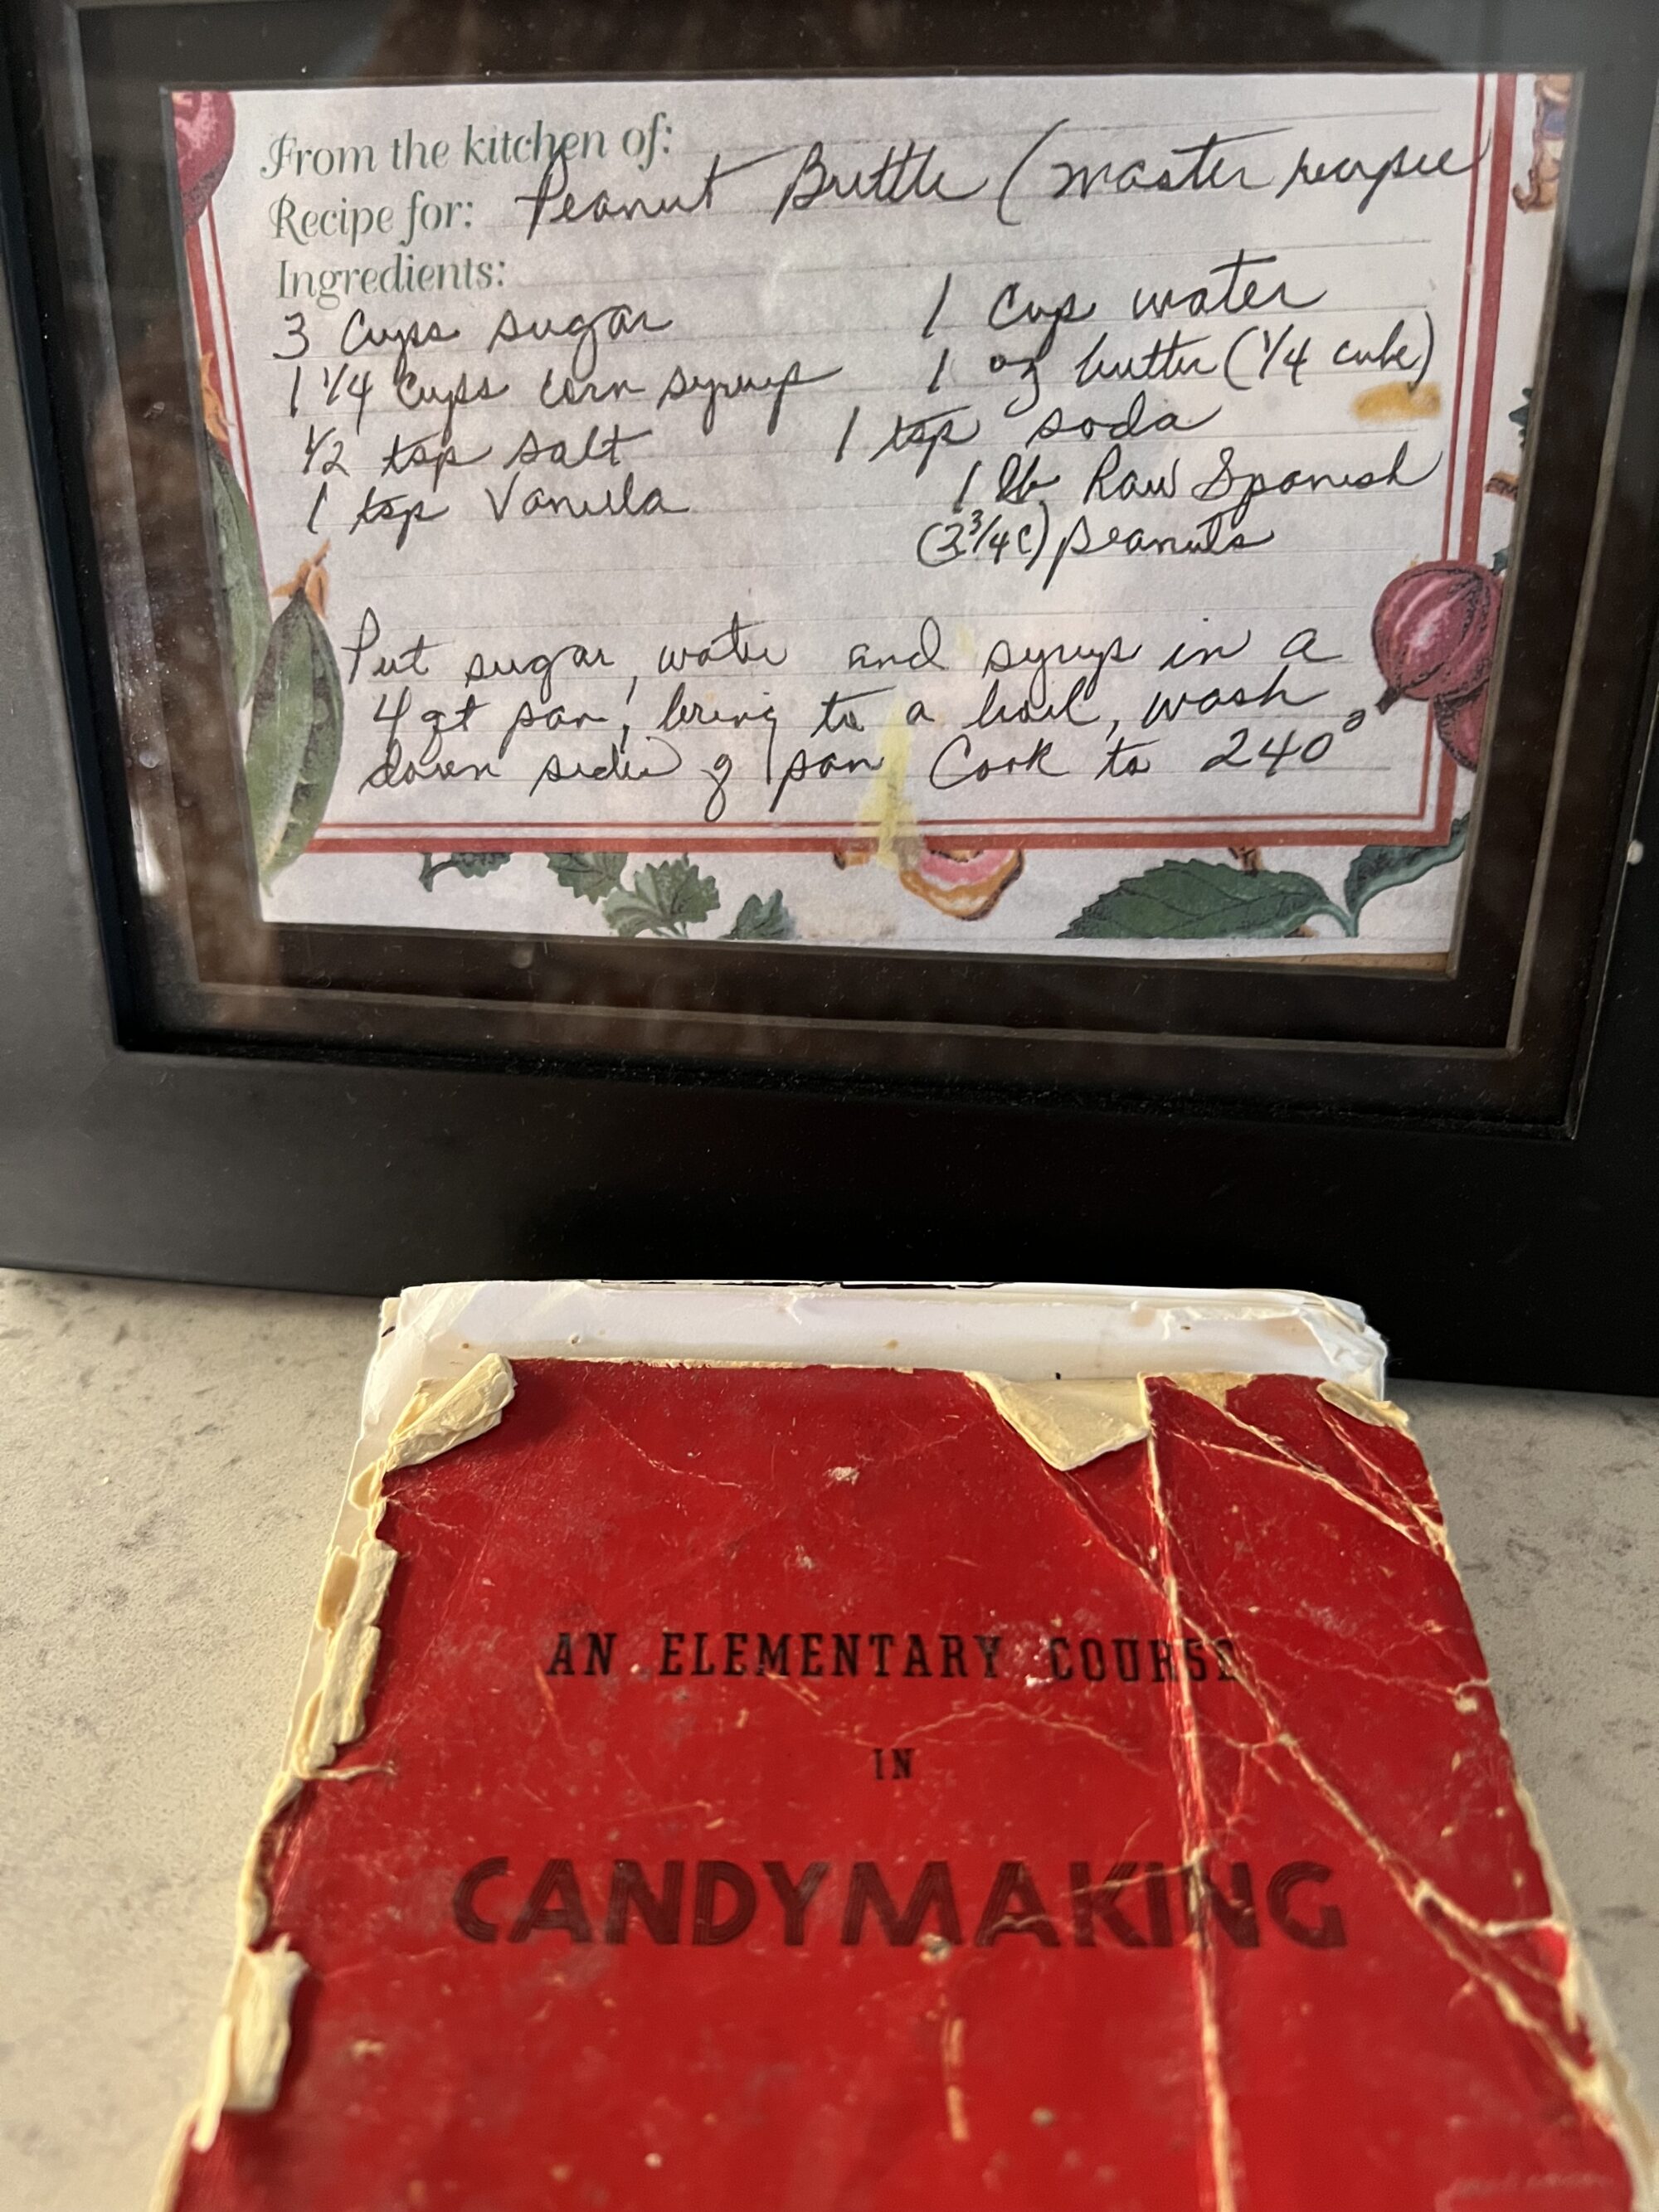 Photo of a worn red candy making book and a framed recipe for peanut brittle.